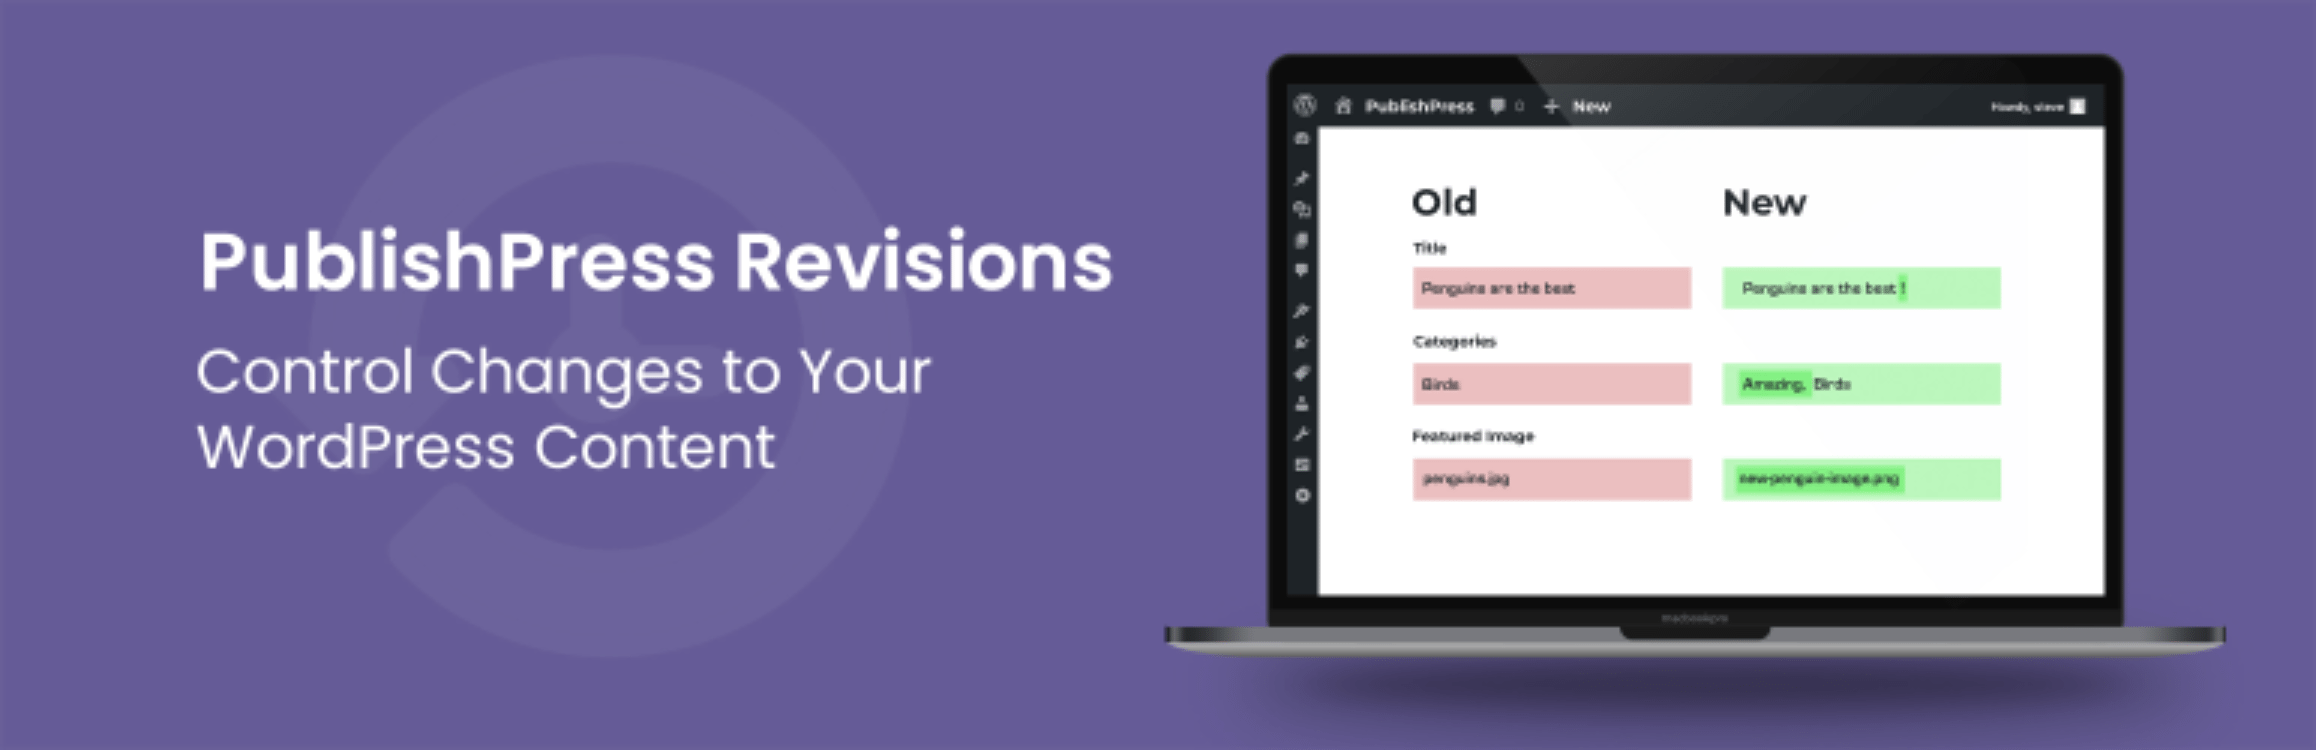 PublishPress Revisions: Duplicate Posts, Submit, Approve And Schedule Content Changes Preview Wordpress Plugin - Rating, Reviews, Demo & Download